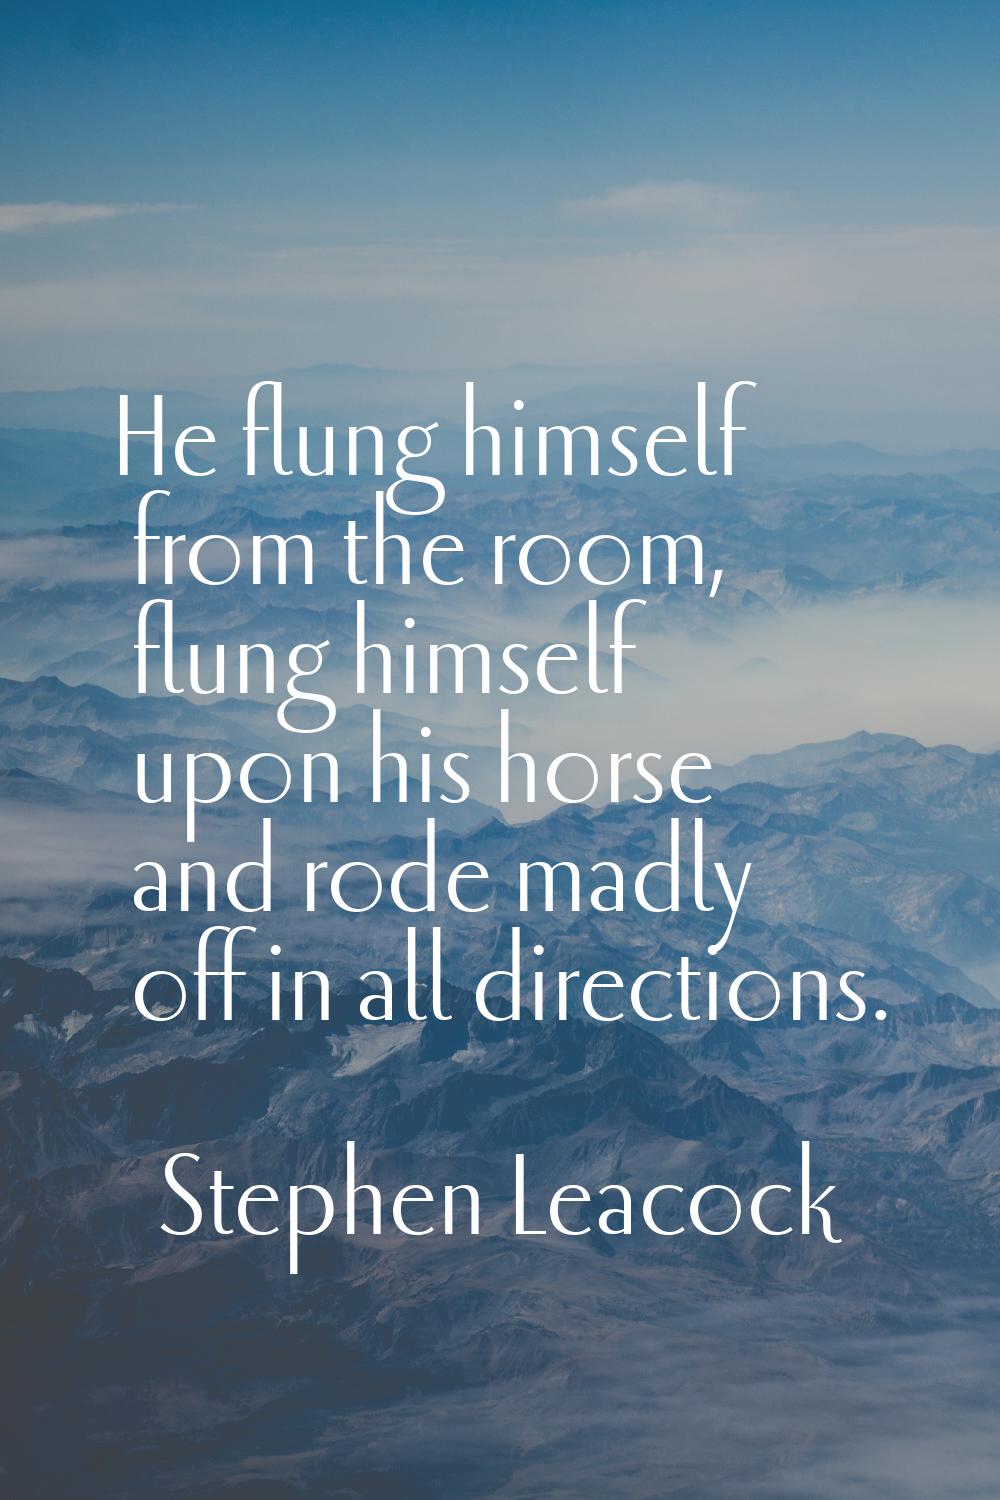 He flung himself from the room, flung himself upon his horse and rode madly off in all directions.